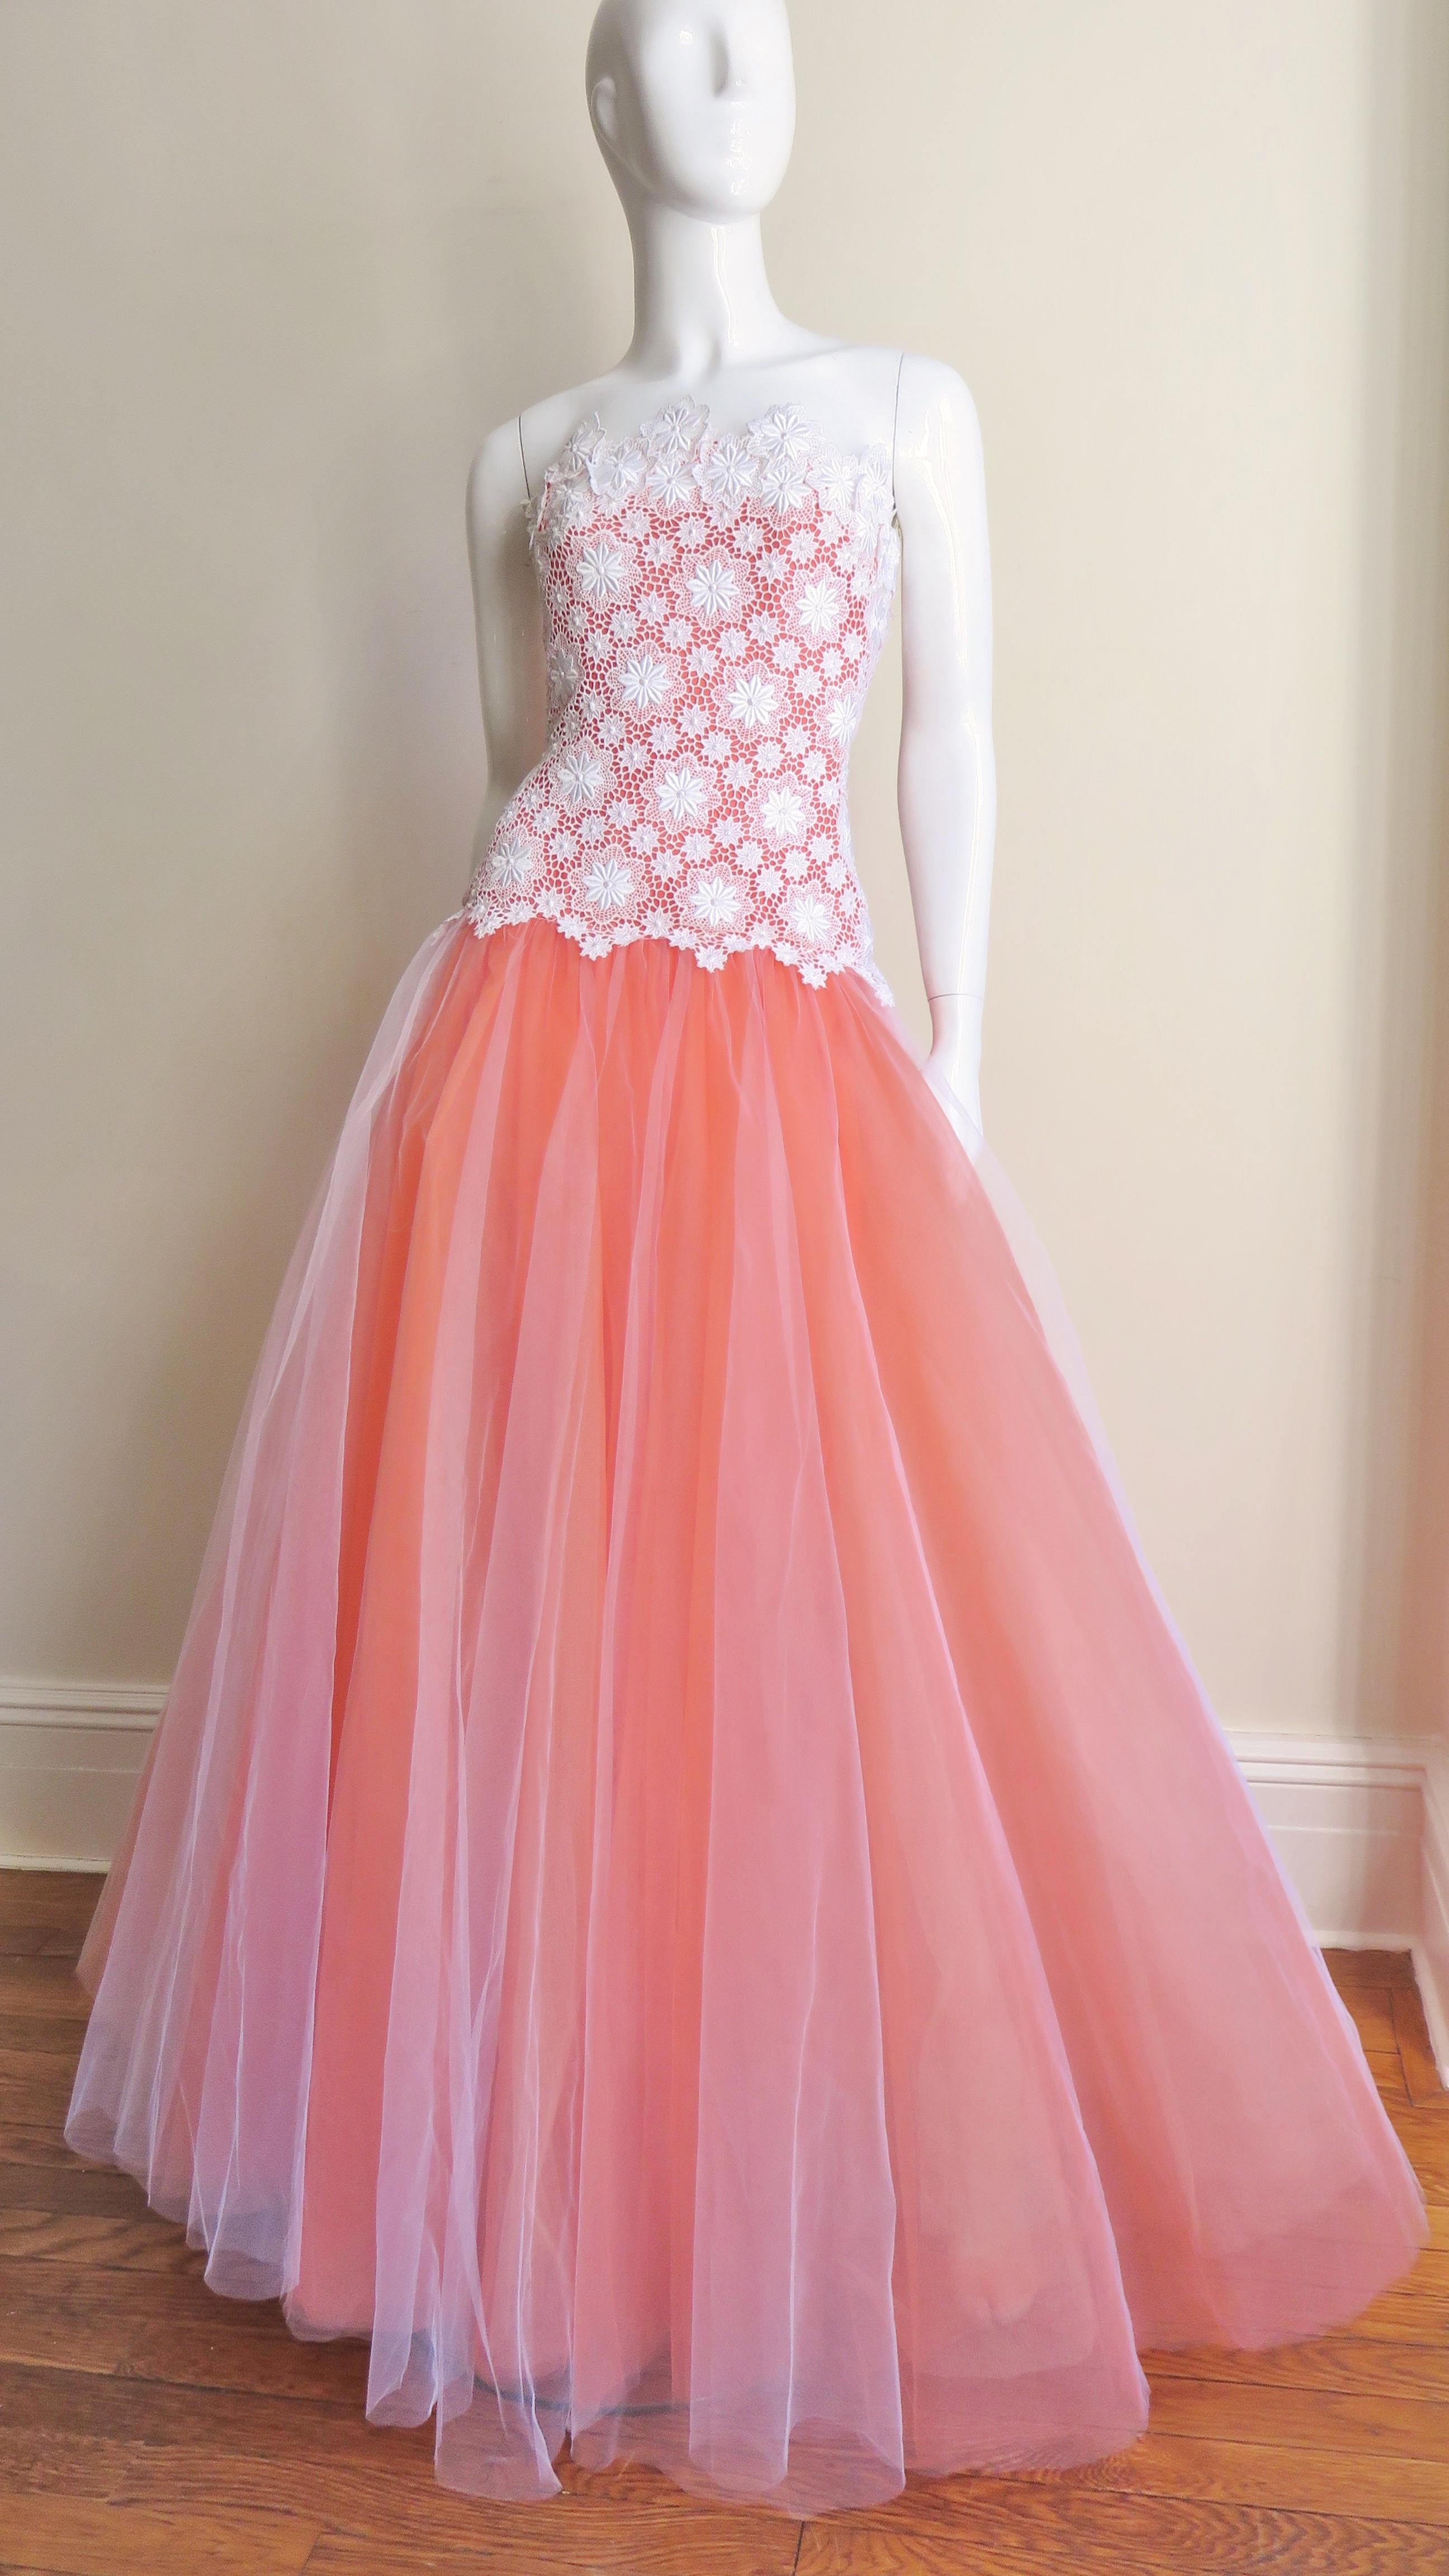 A fabulous gown from Arnold Scaasi in coral and white.  It is strapless with a fitted, boned, hip length bodice of white lace with flower appliques.  The magnificent tulle skirt emanates from under the scalloped edges of the bodice at the hips and